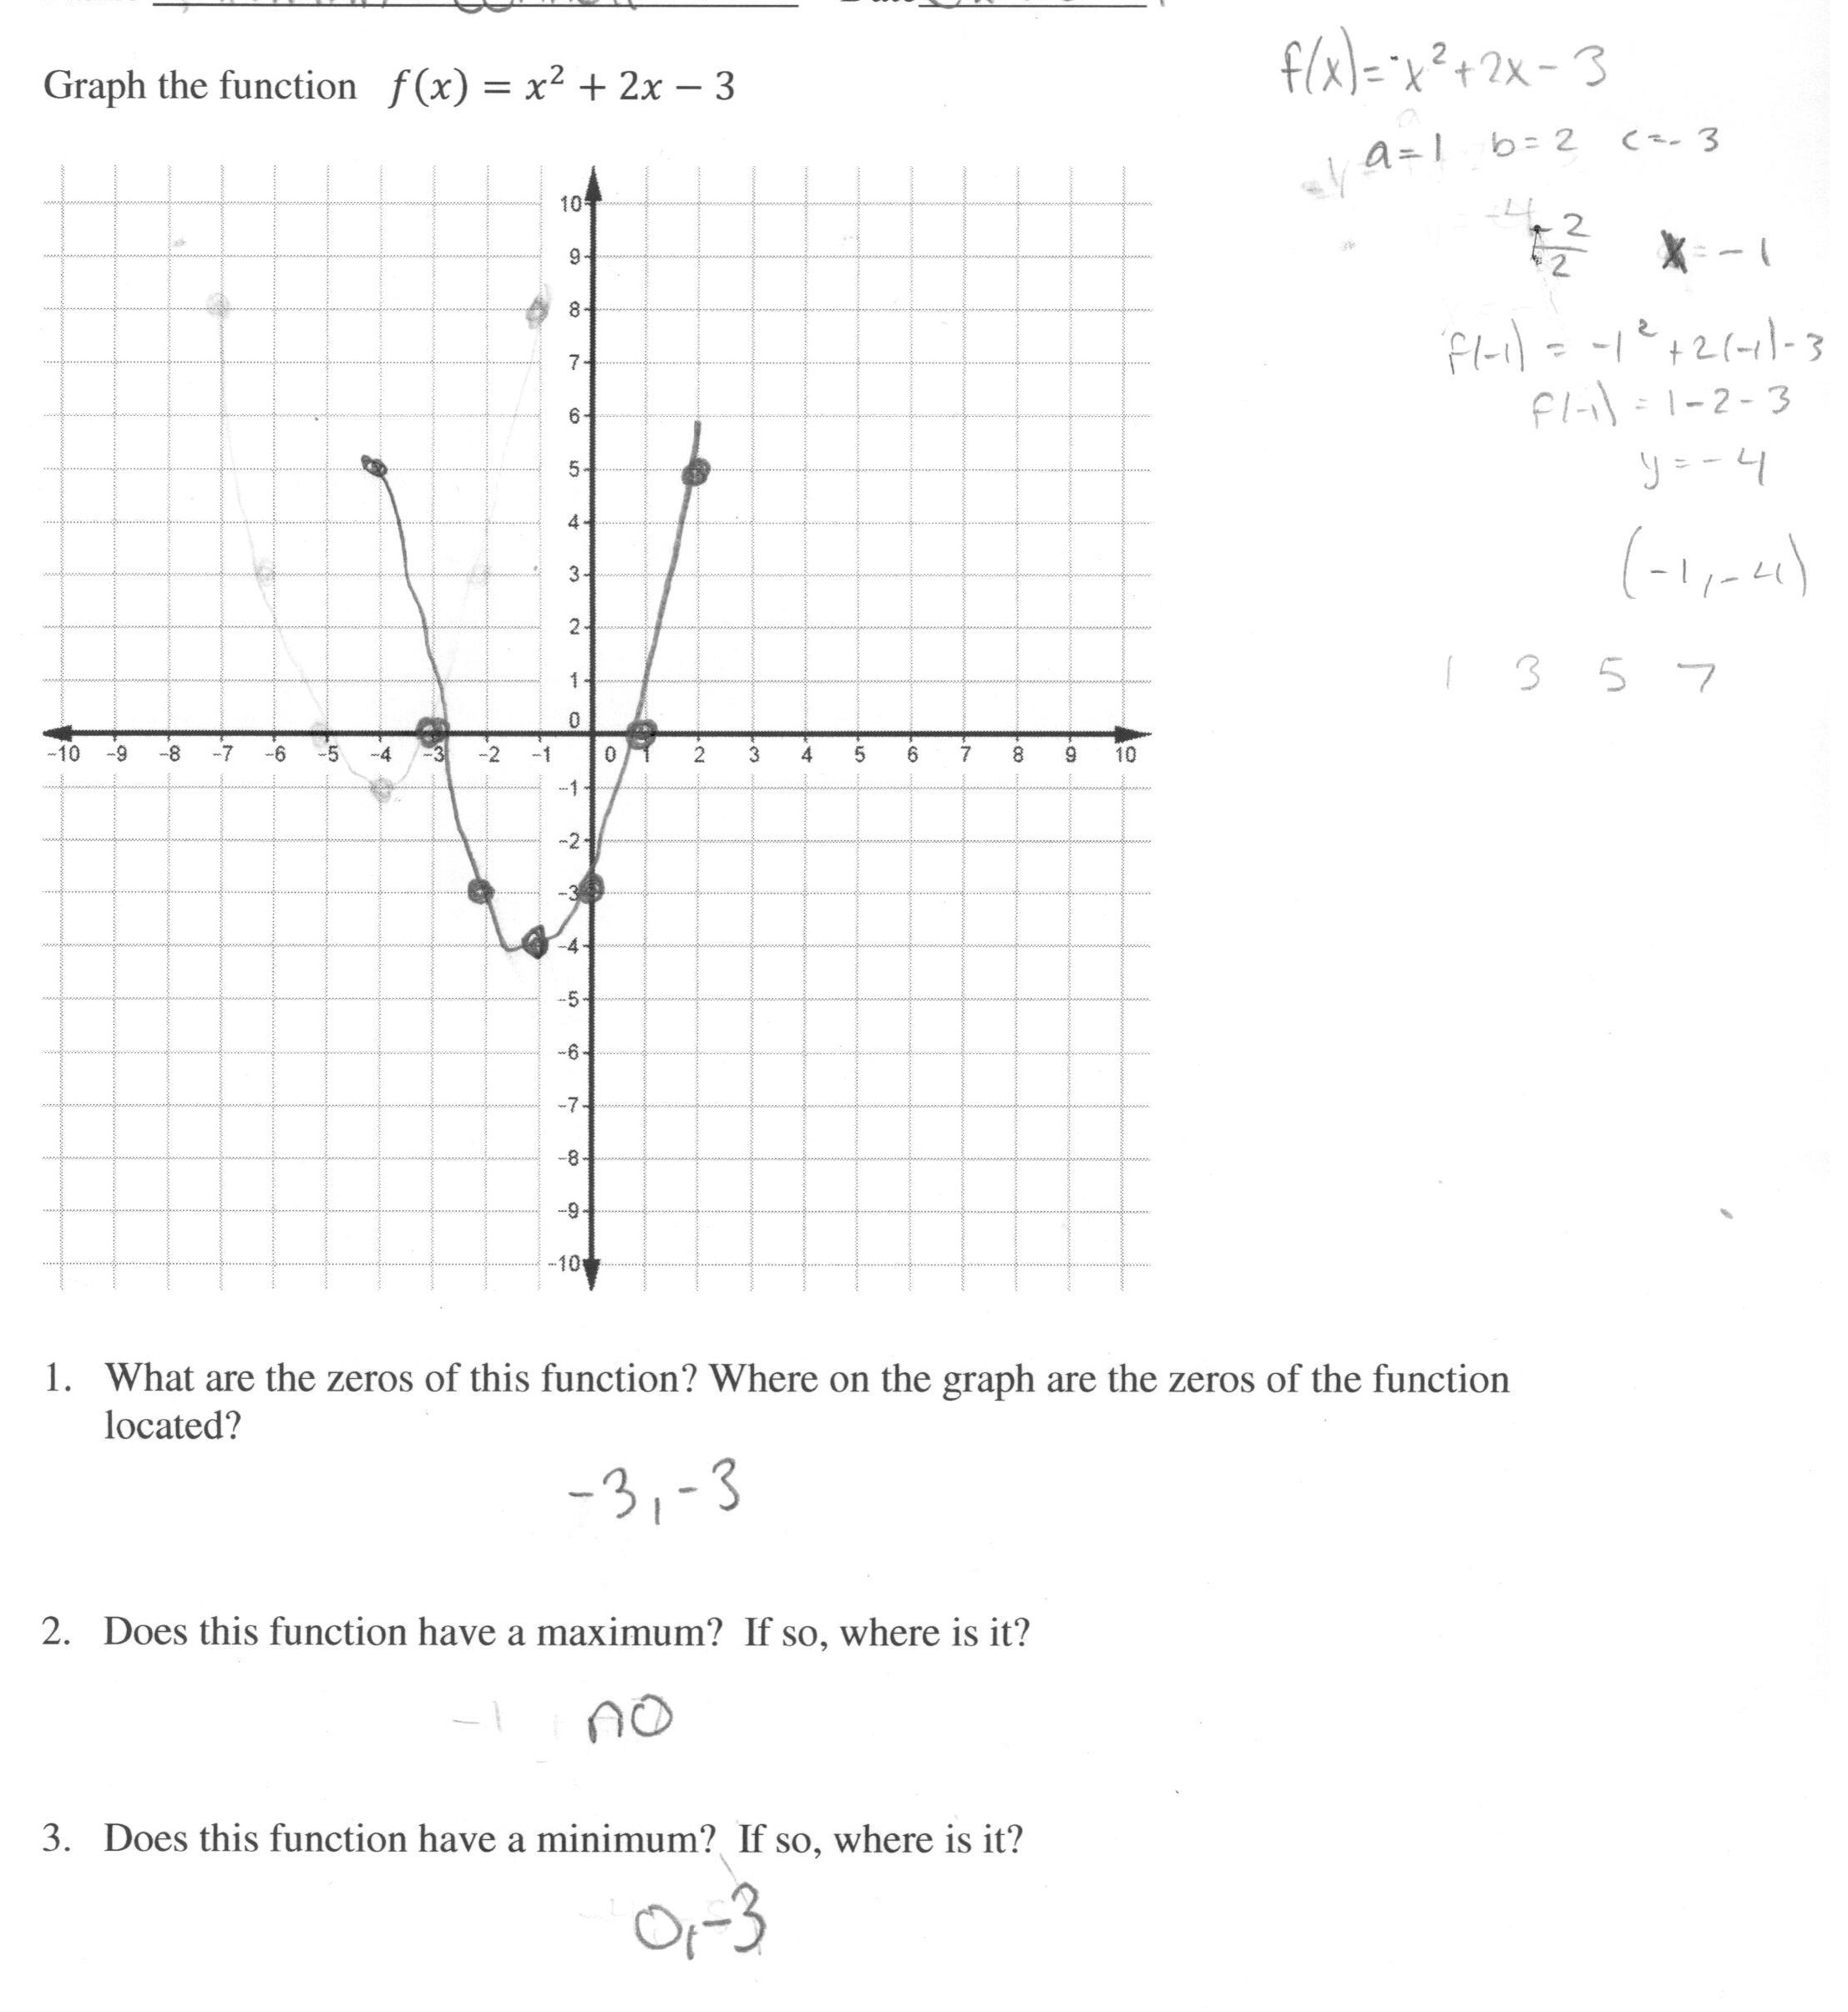 solving quadratic equations by graphing practice questions